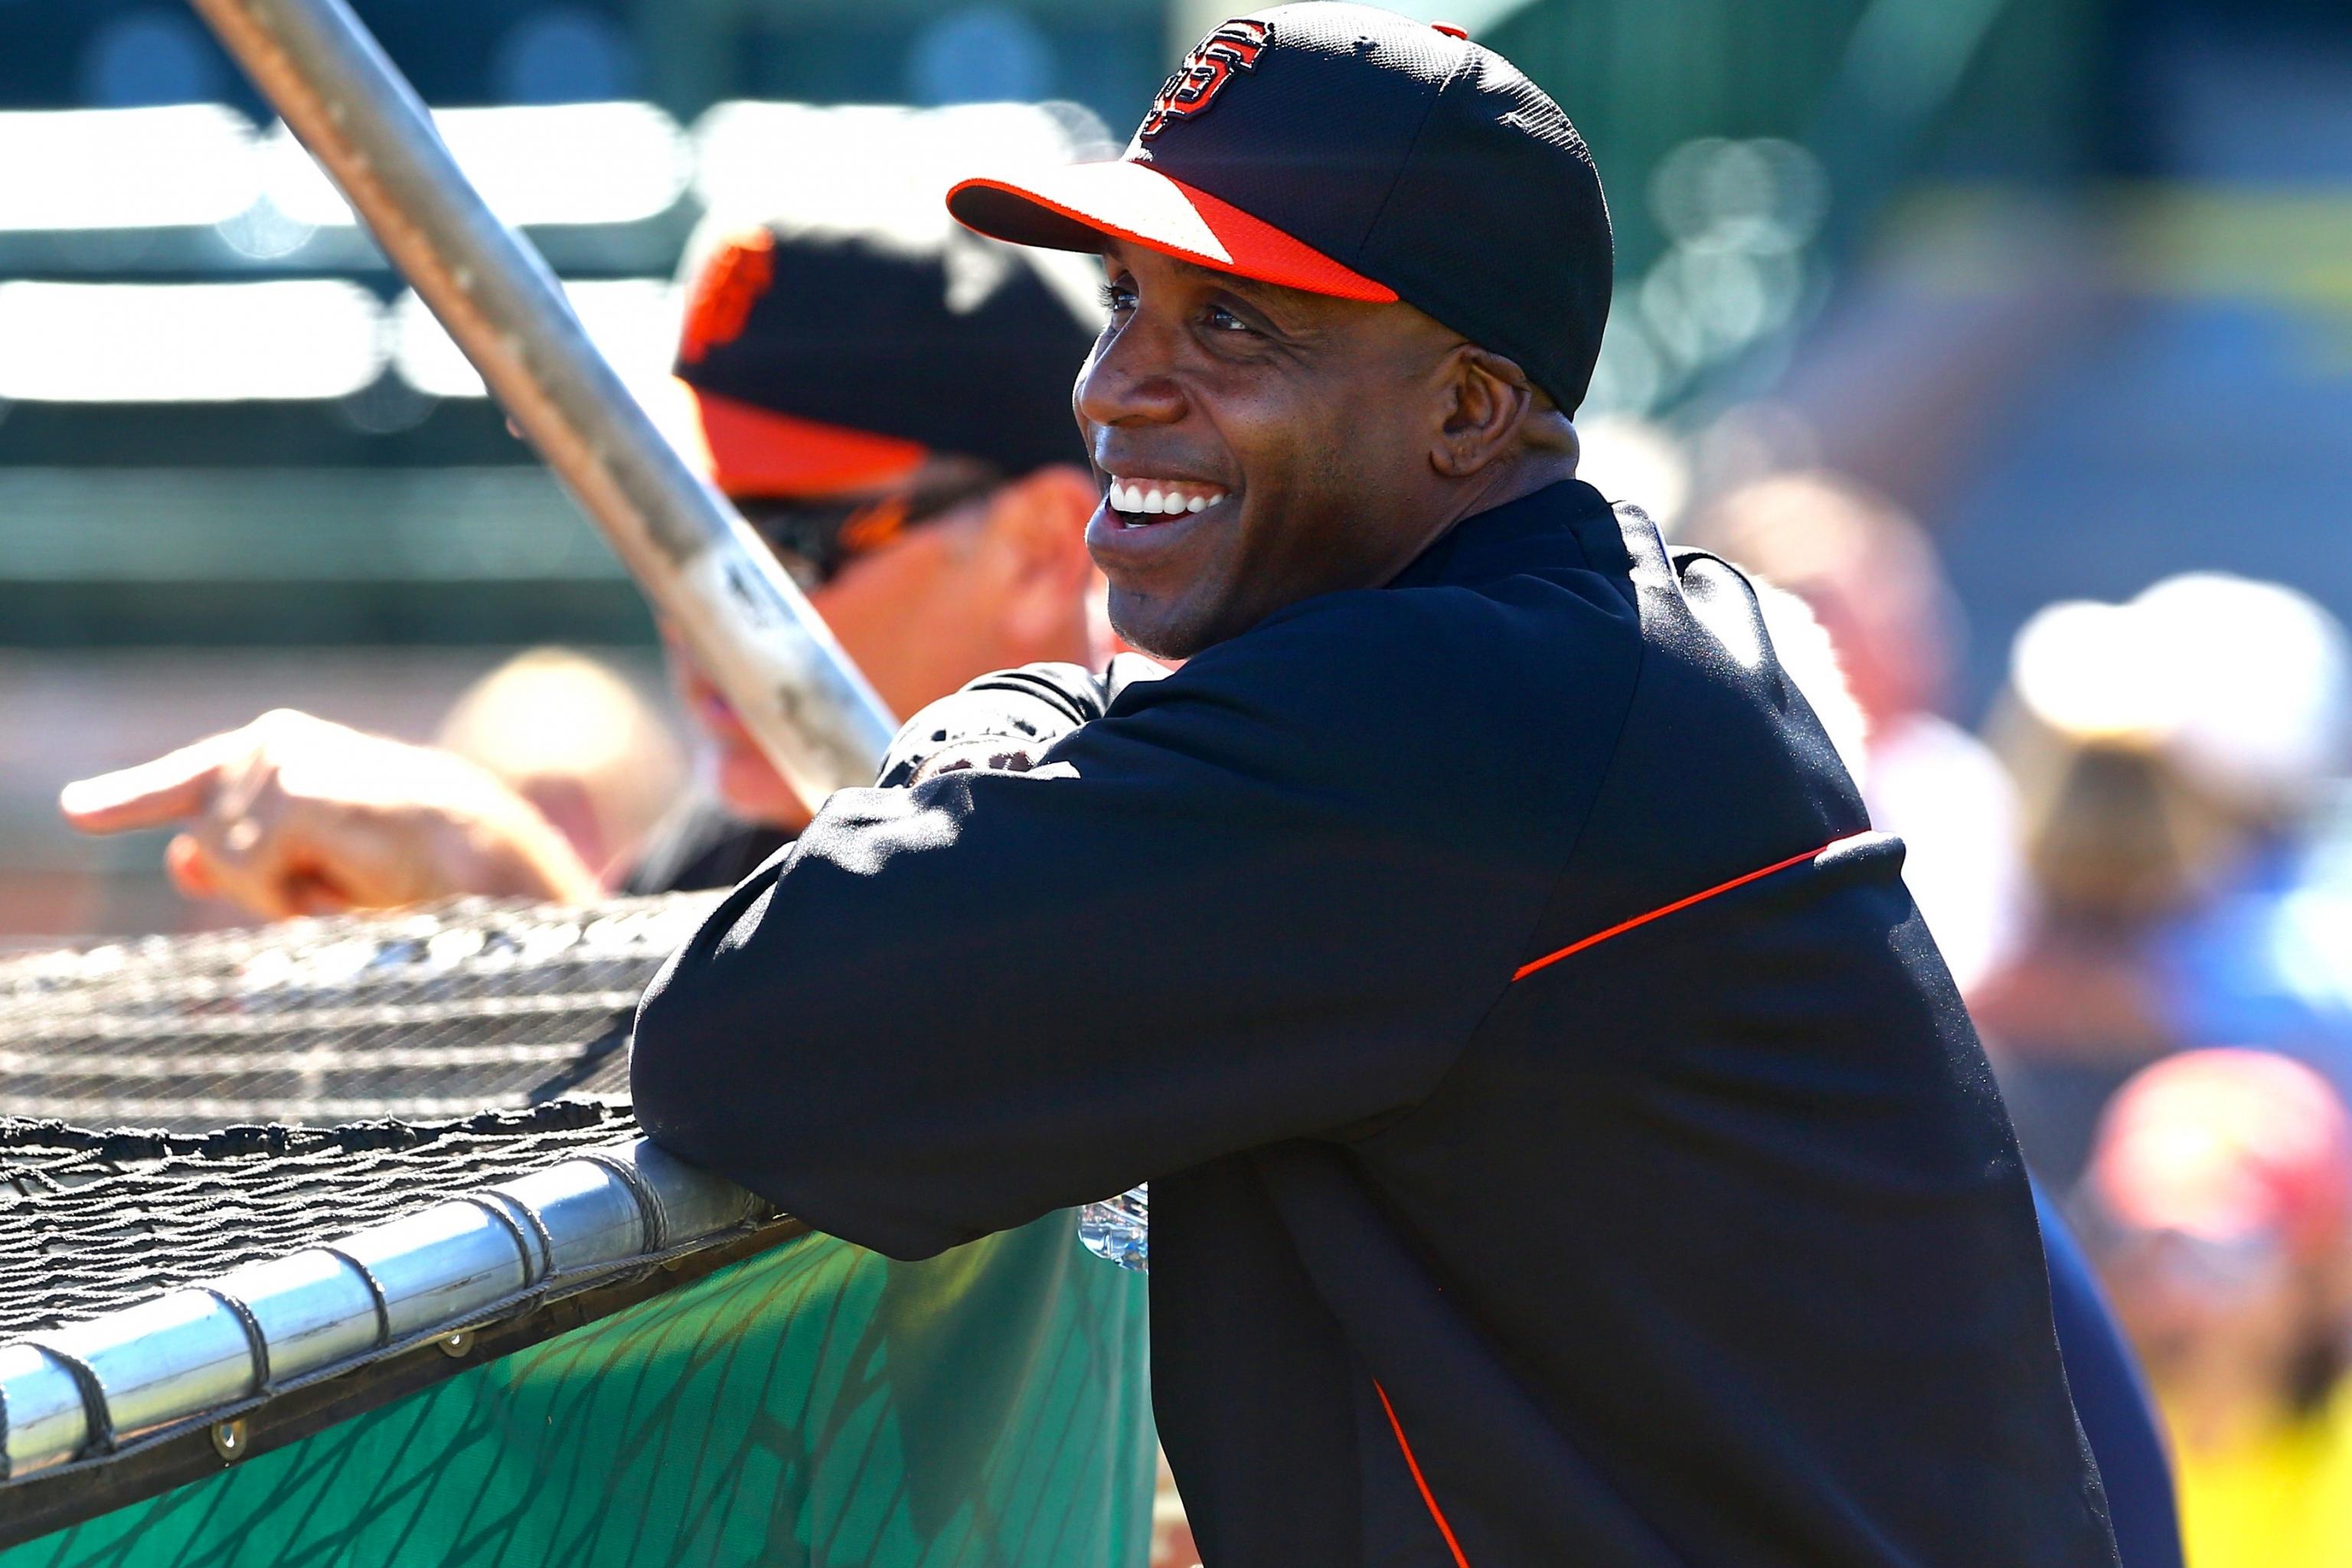 Grading the Week: Barry Bonds might not be a good guy, but he's